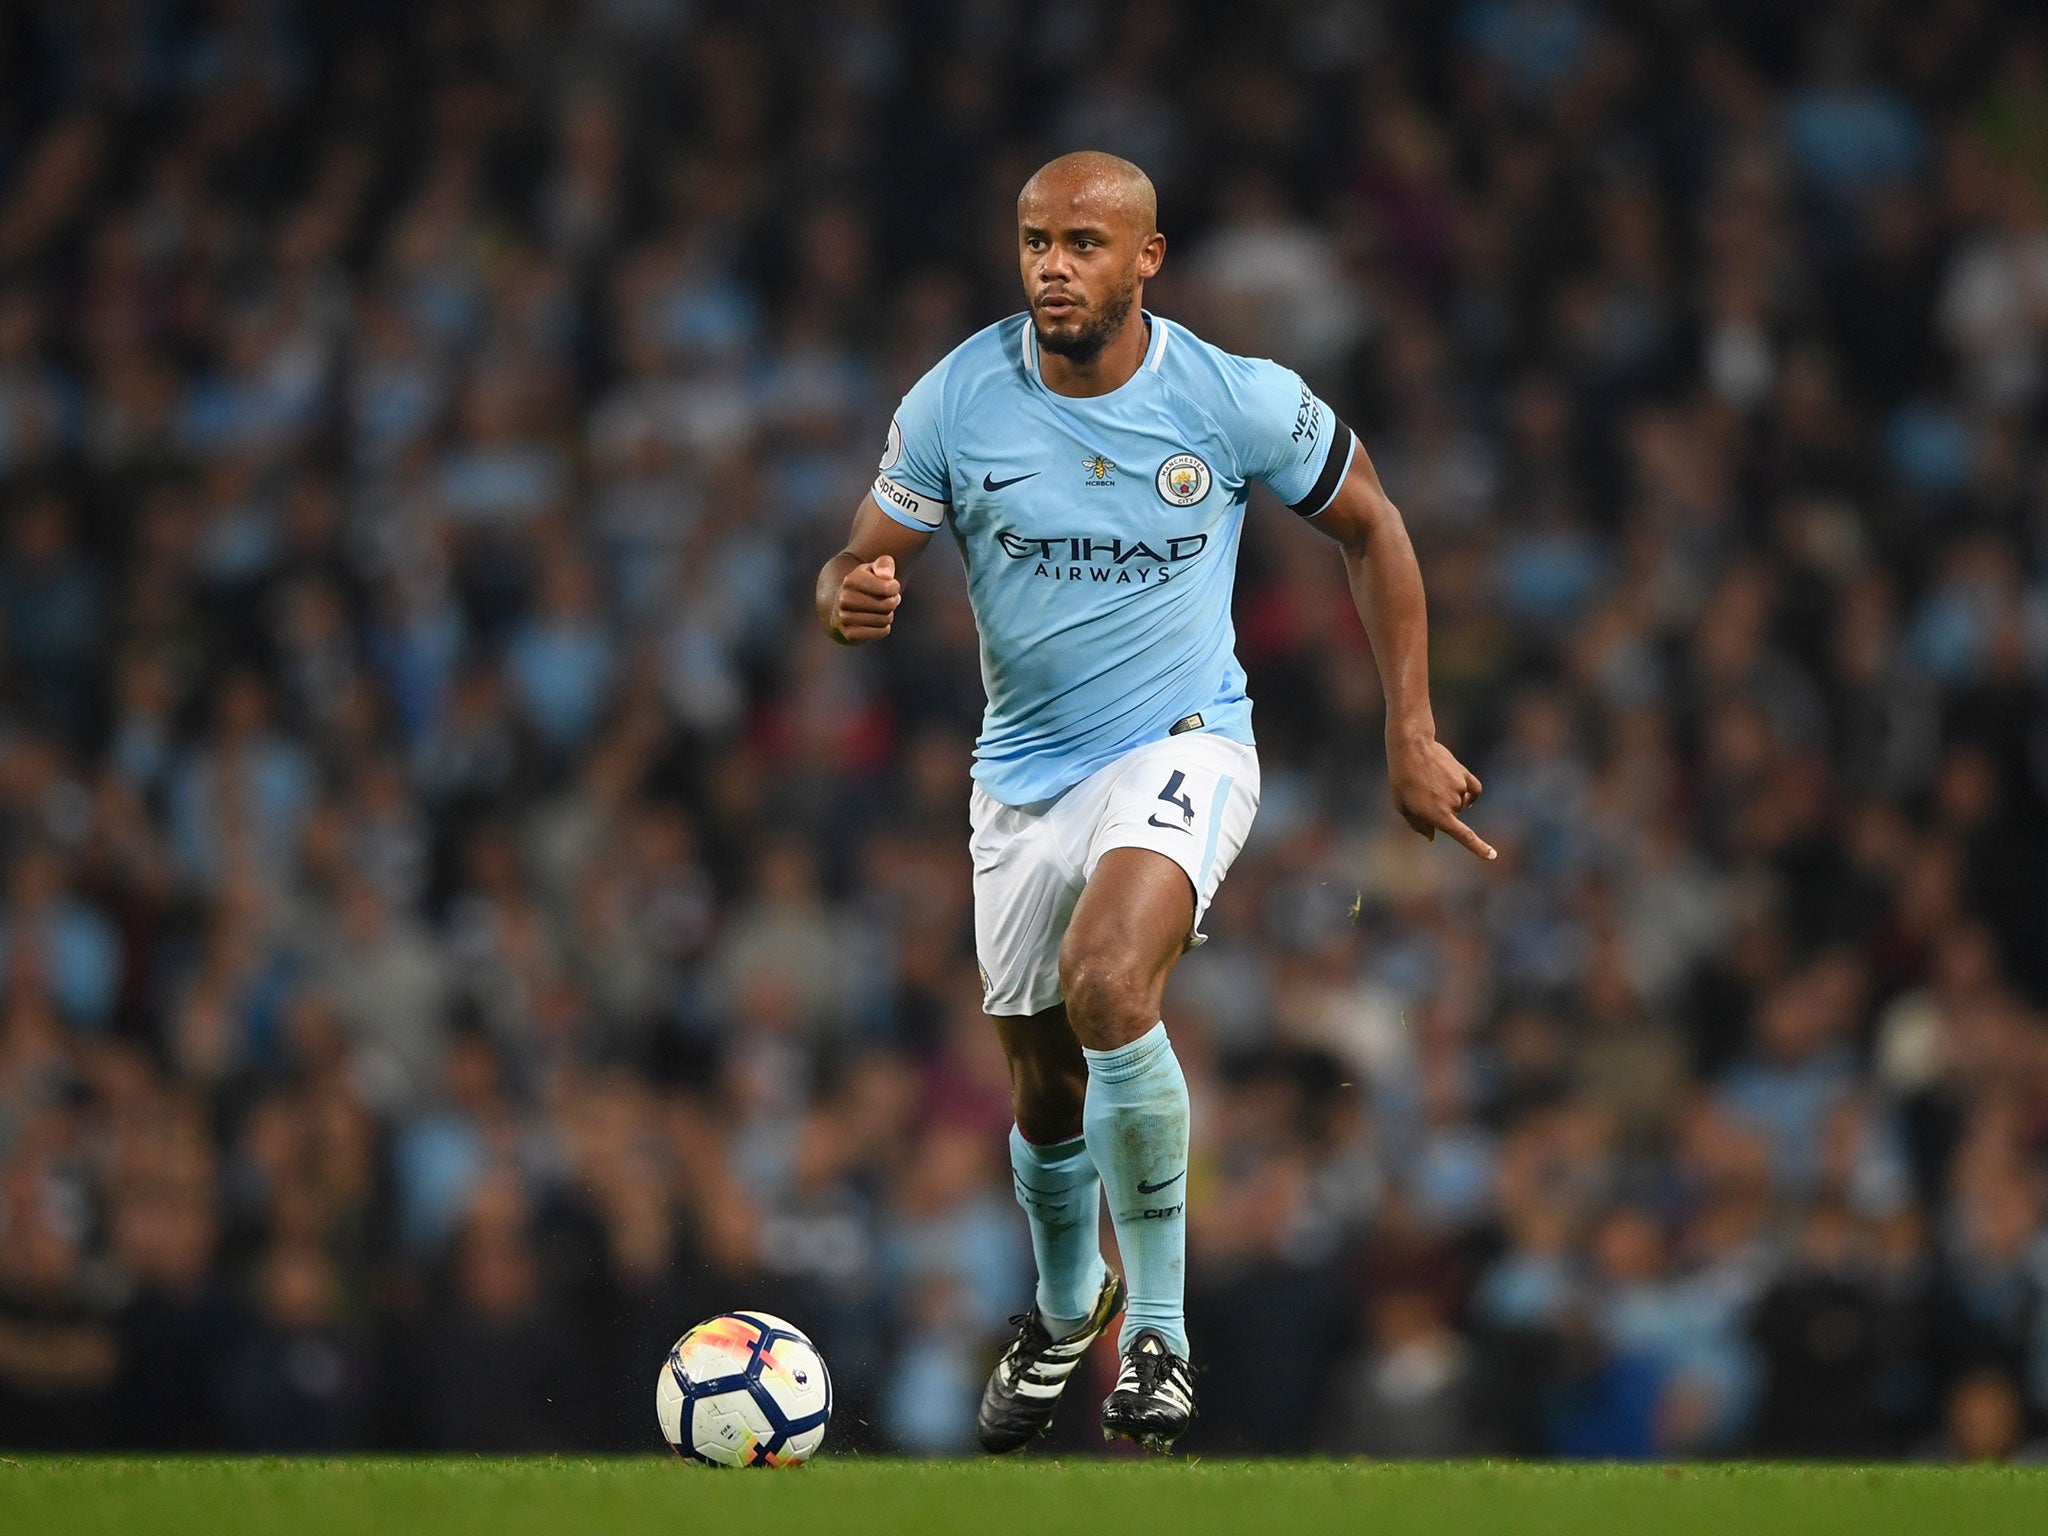 Vincent Kompany in action for City against Everton